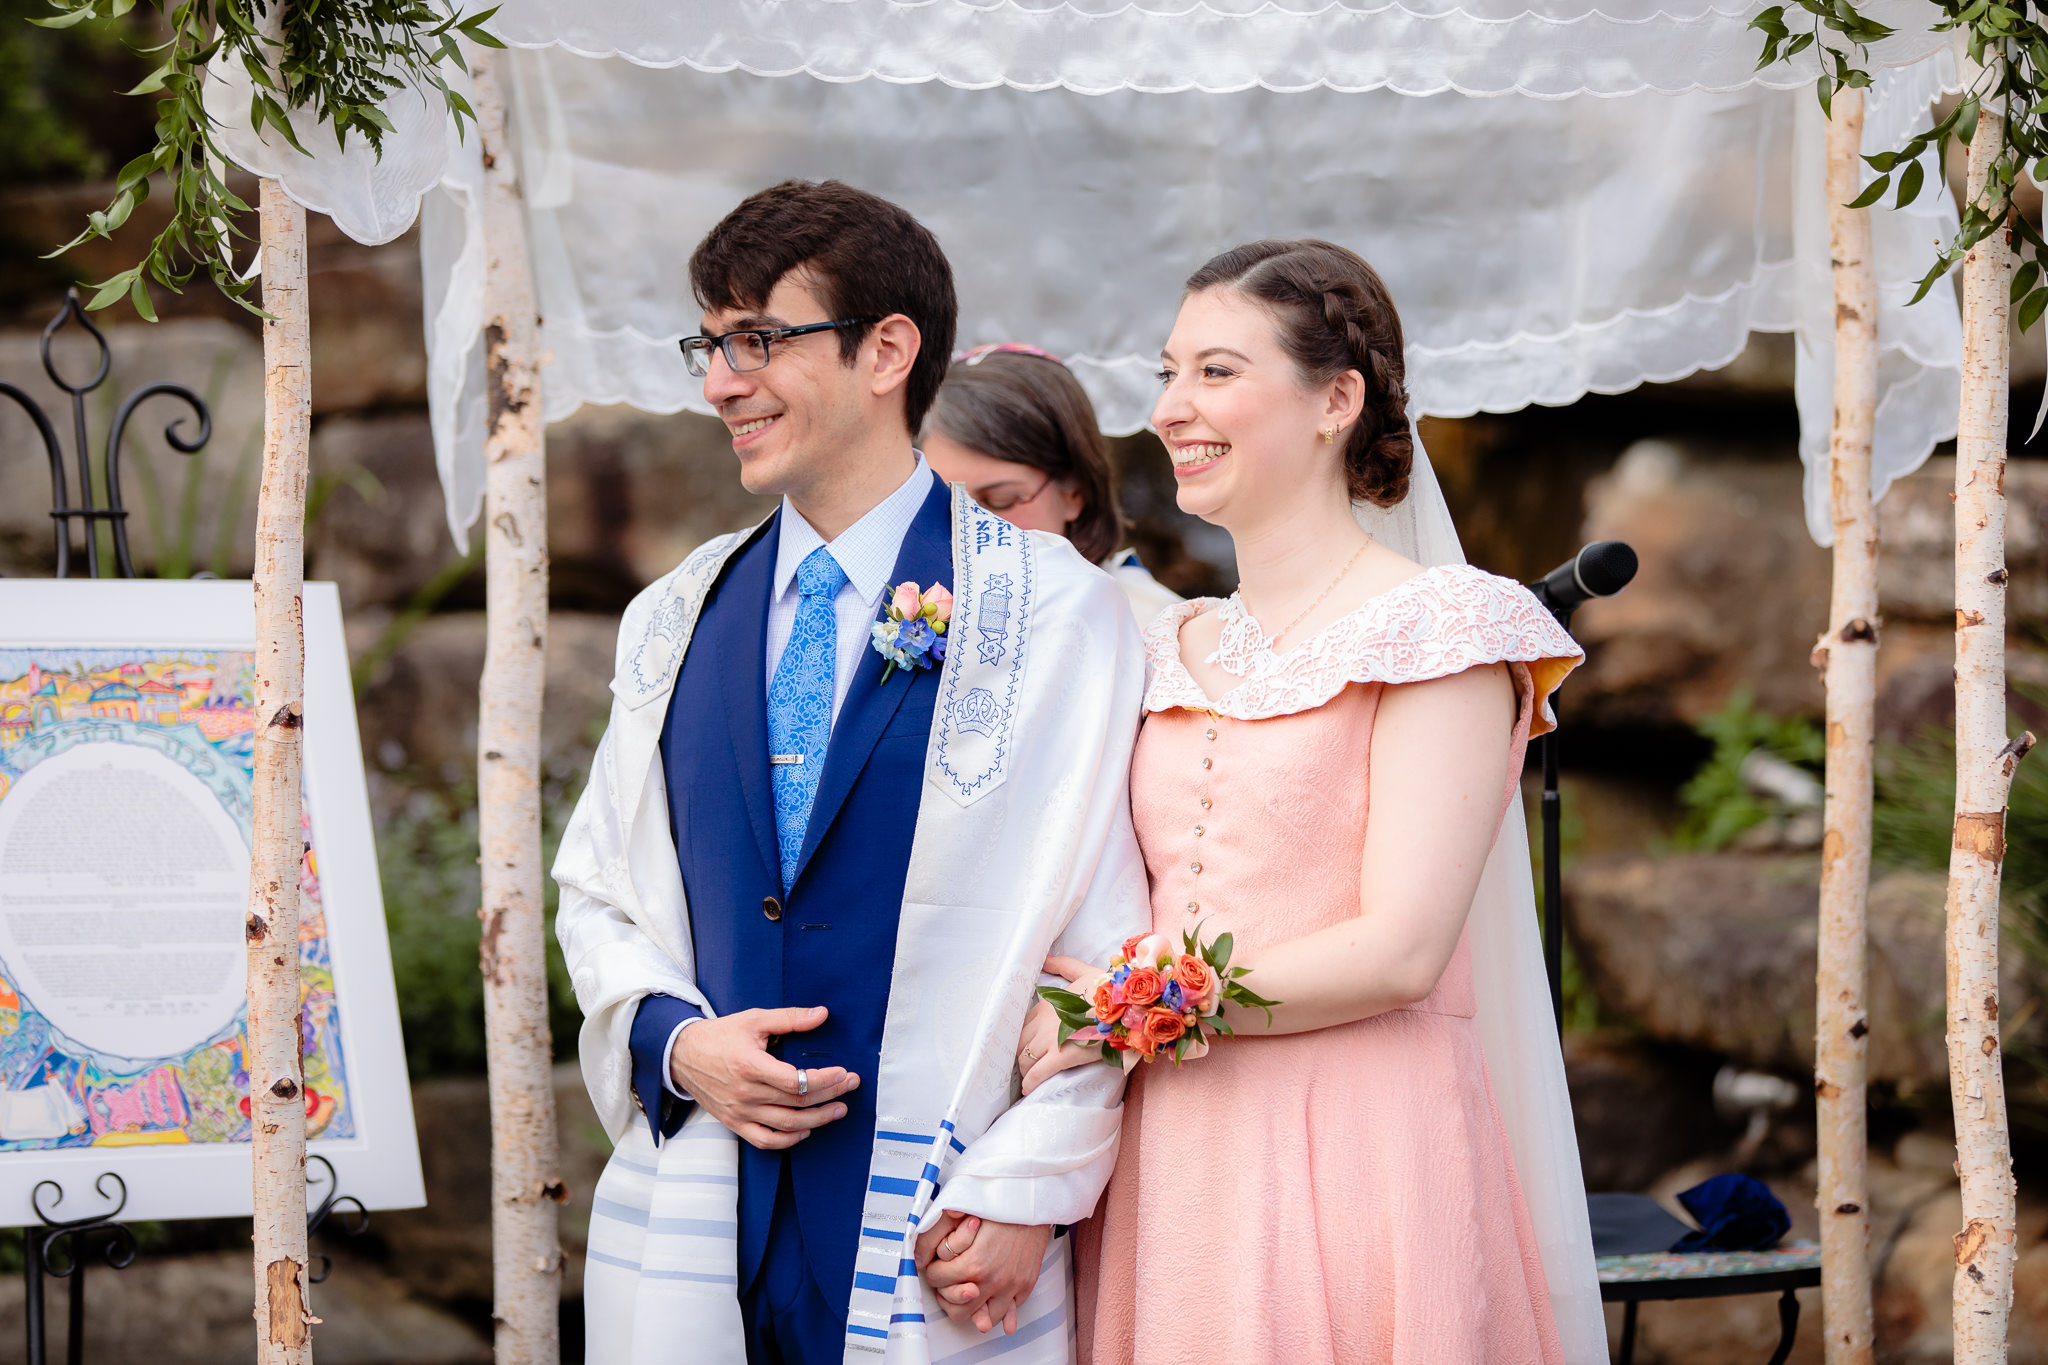 Bride and groom smile under the chuppah at a Jewish wedding at Phipps Conservatory